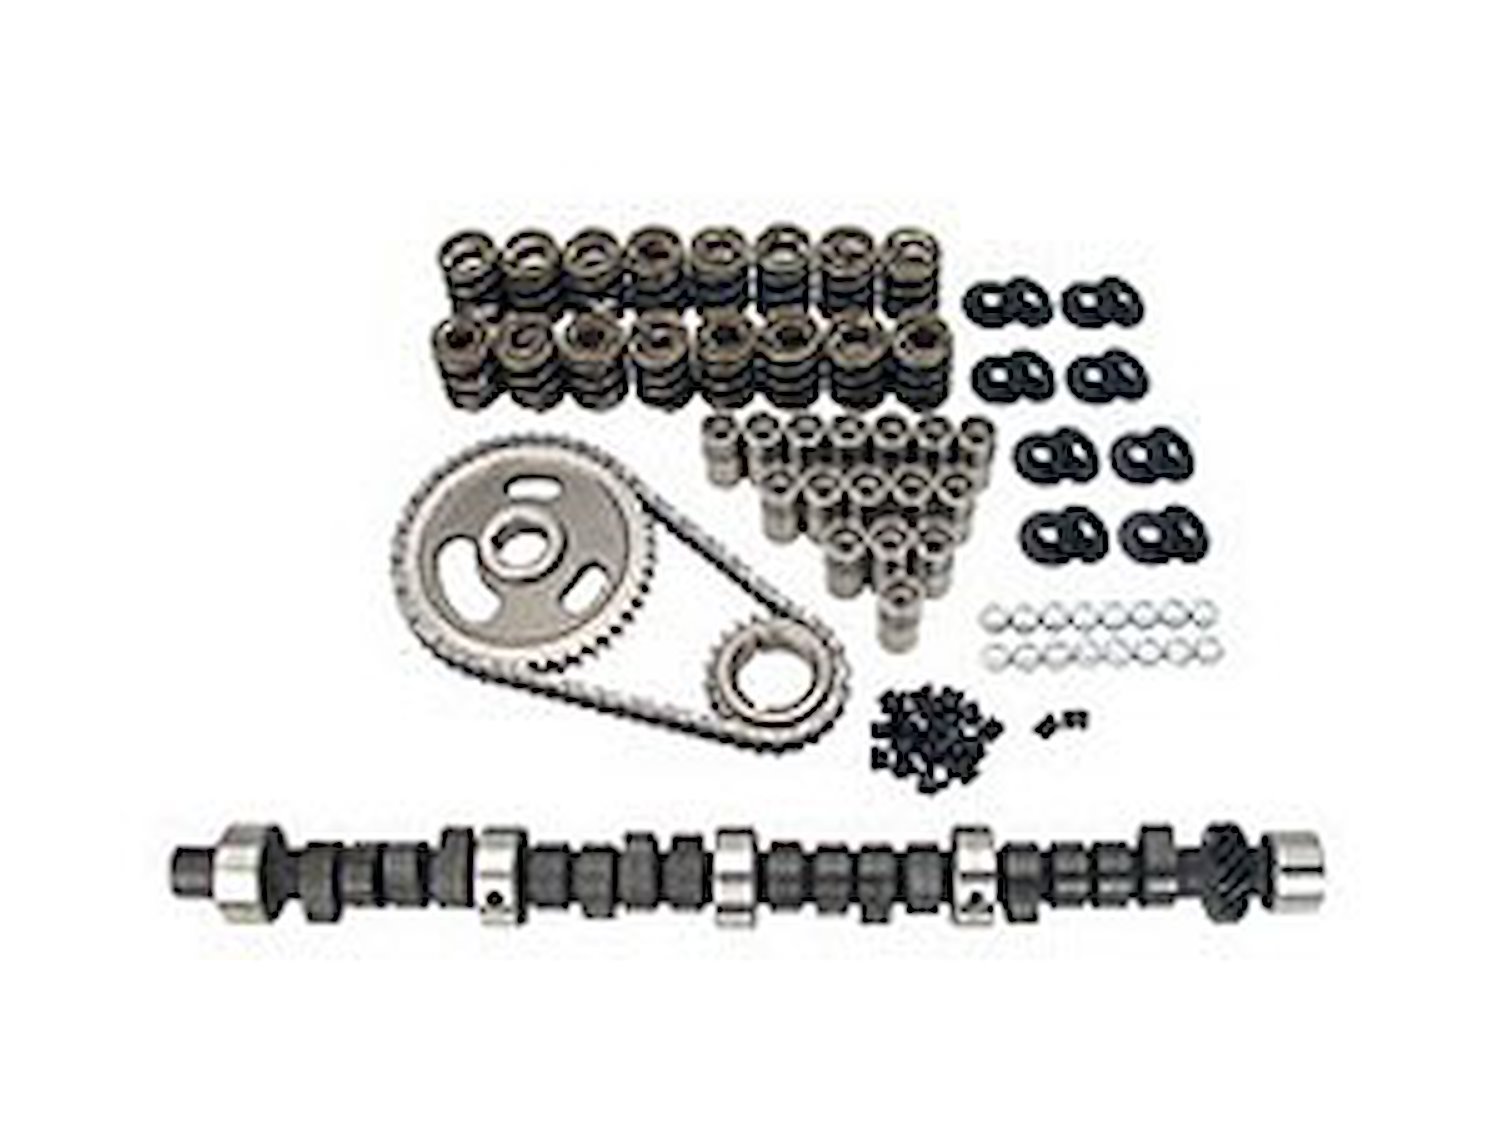 Xtreme Energy 250H Hydraulic Flat Tappet Camshaft Complete Kit Lift .432"/.444" Duration 250°/260° RPM Range 600-4800